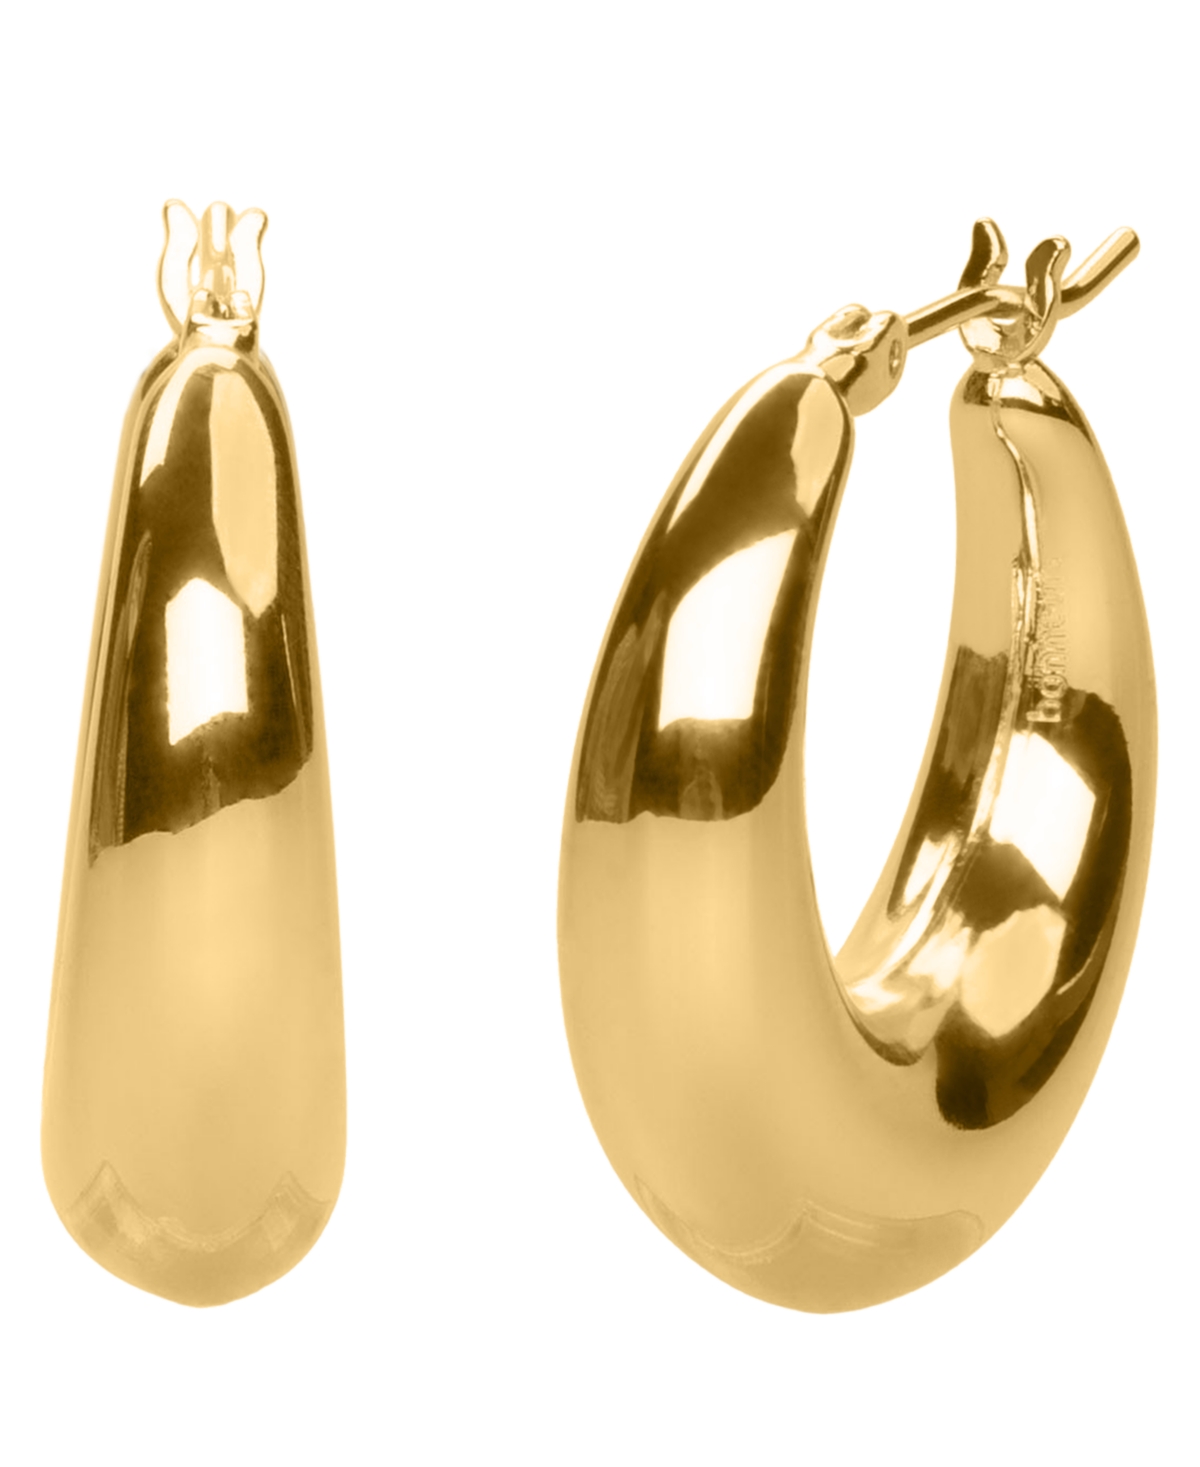 Bonheur Jewelry Large Puffy Hoops In Karat Gold Plated Brass